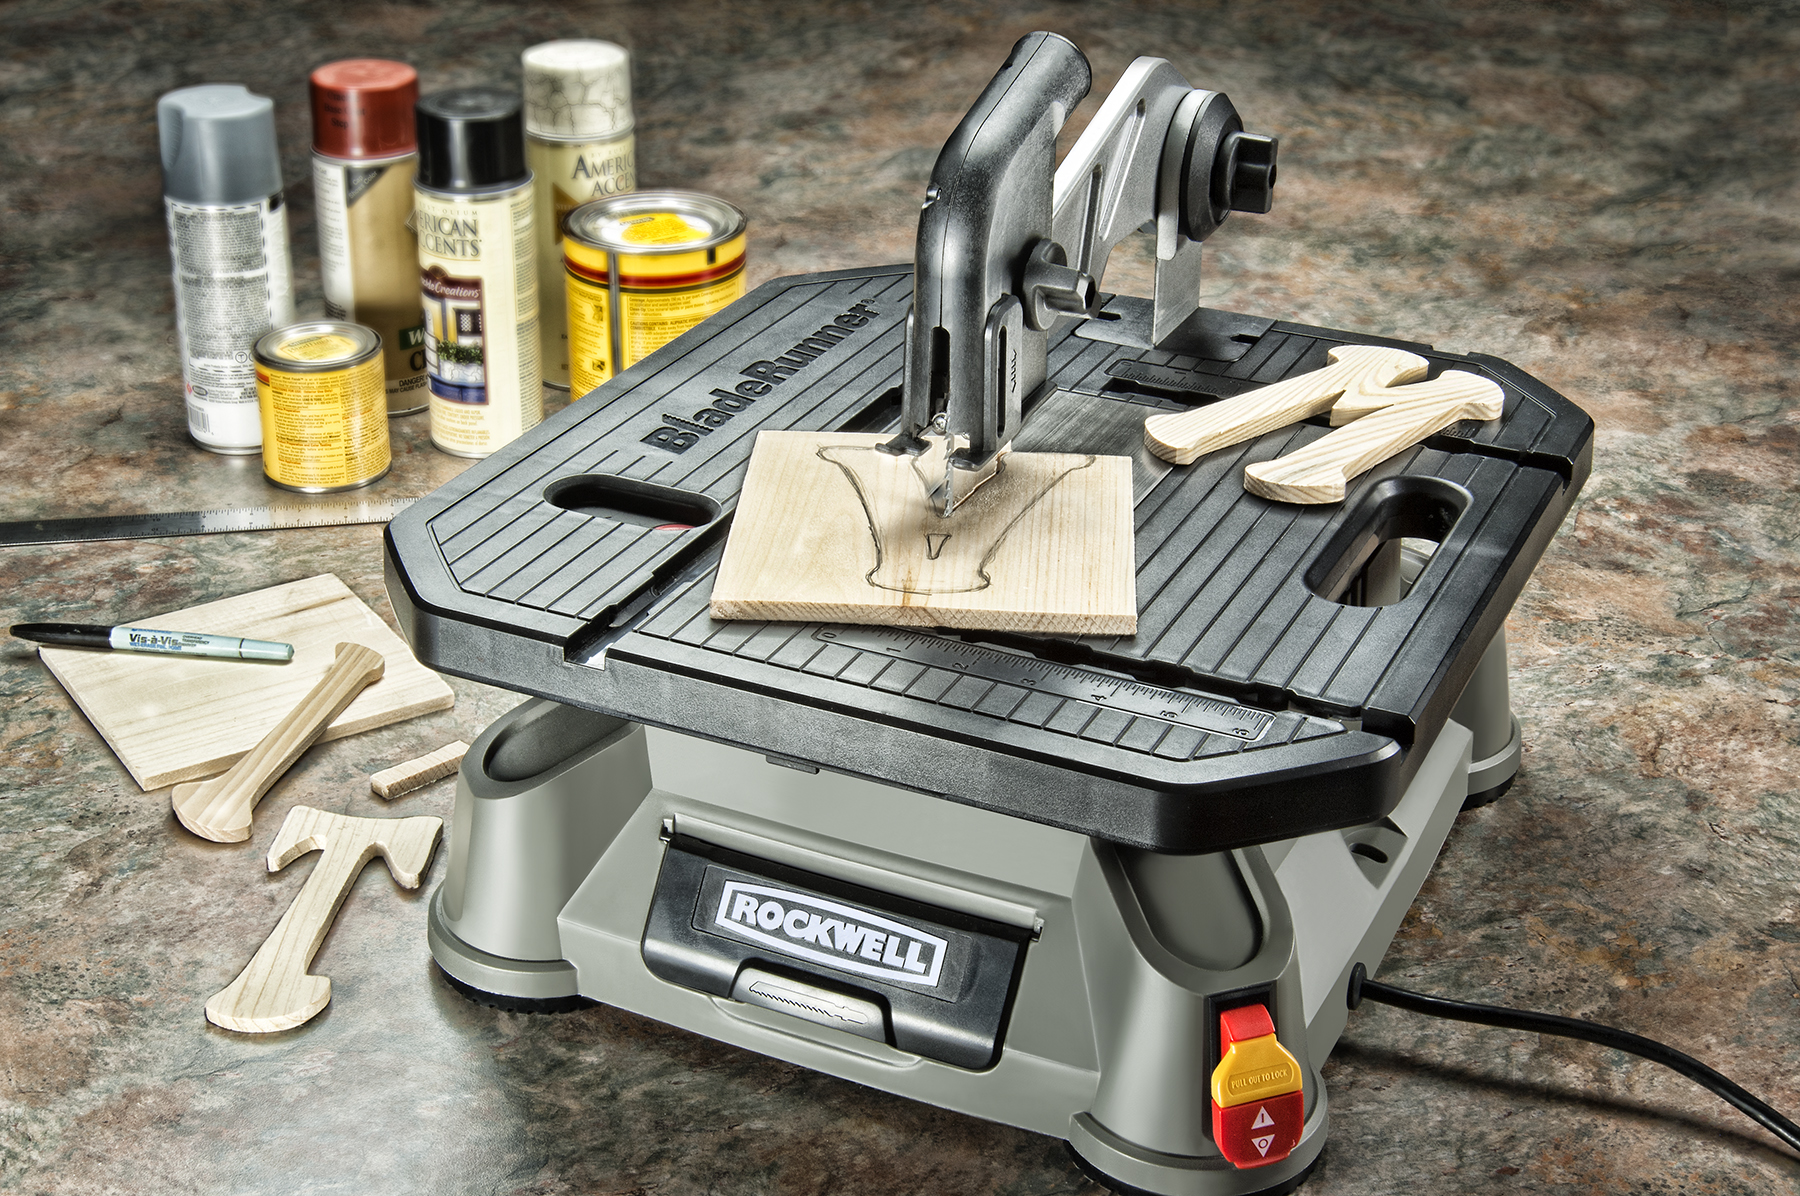 Rockwell BladeRunner X2 is a great saw for summer craft projects.